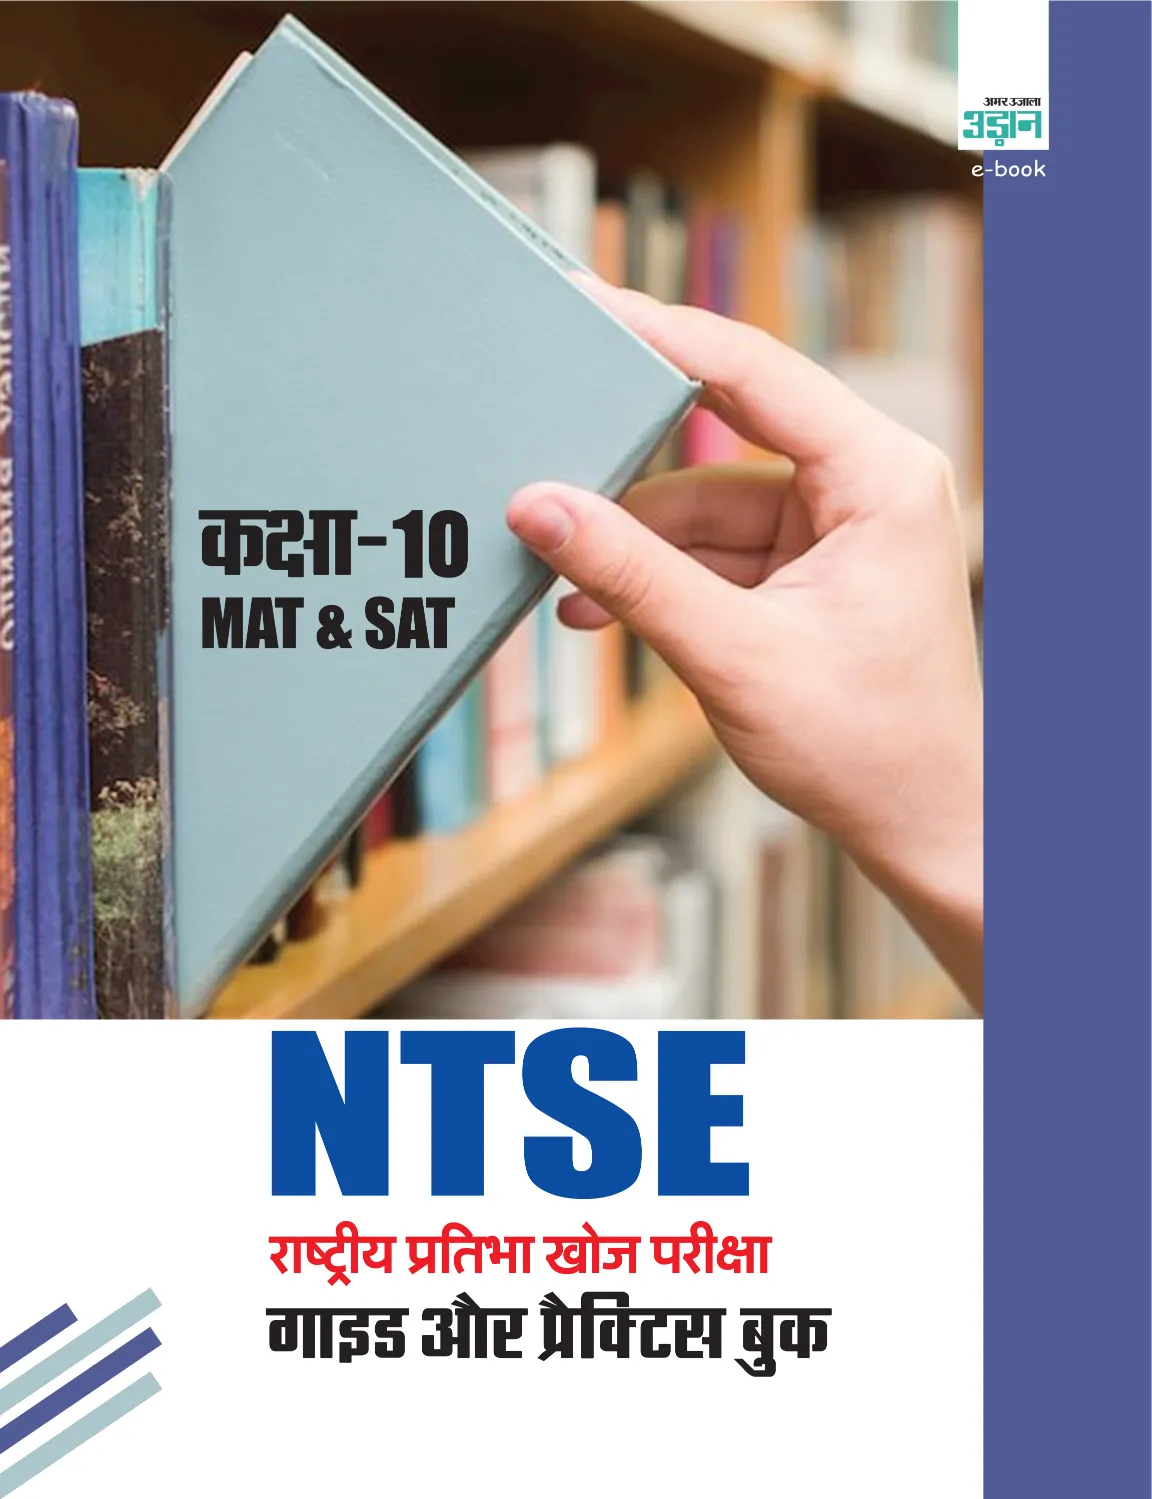 NTSE (National Talent Search Examination) Guide and Practice Book